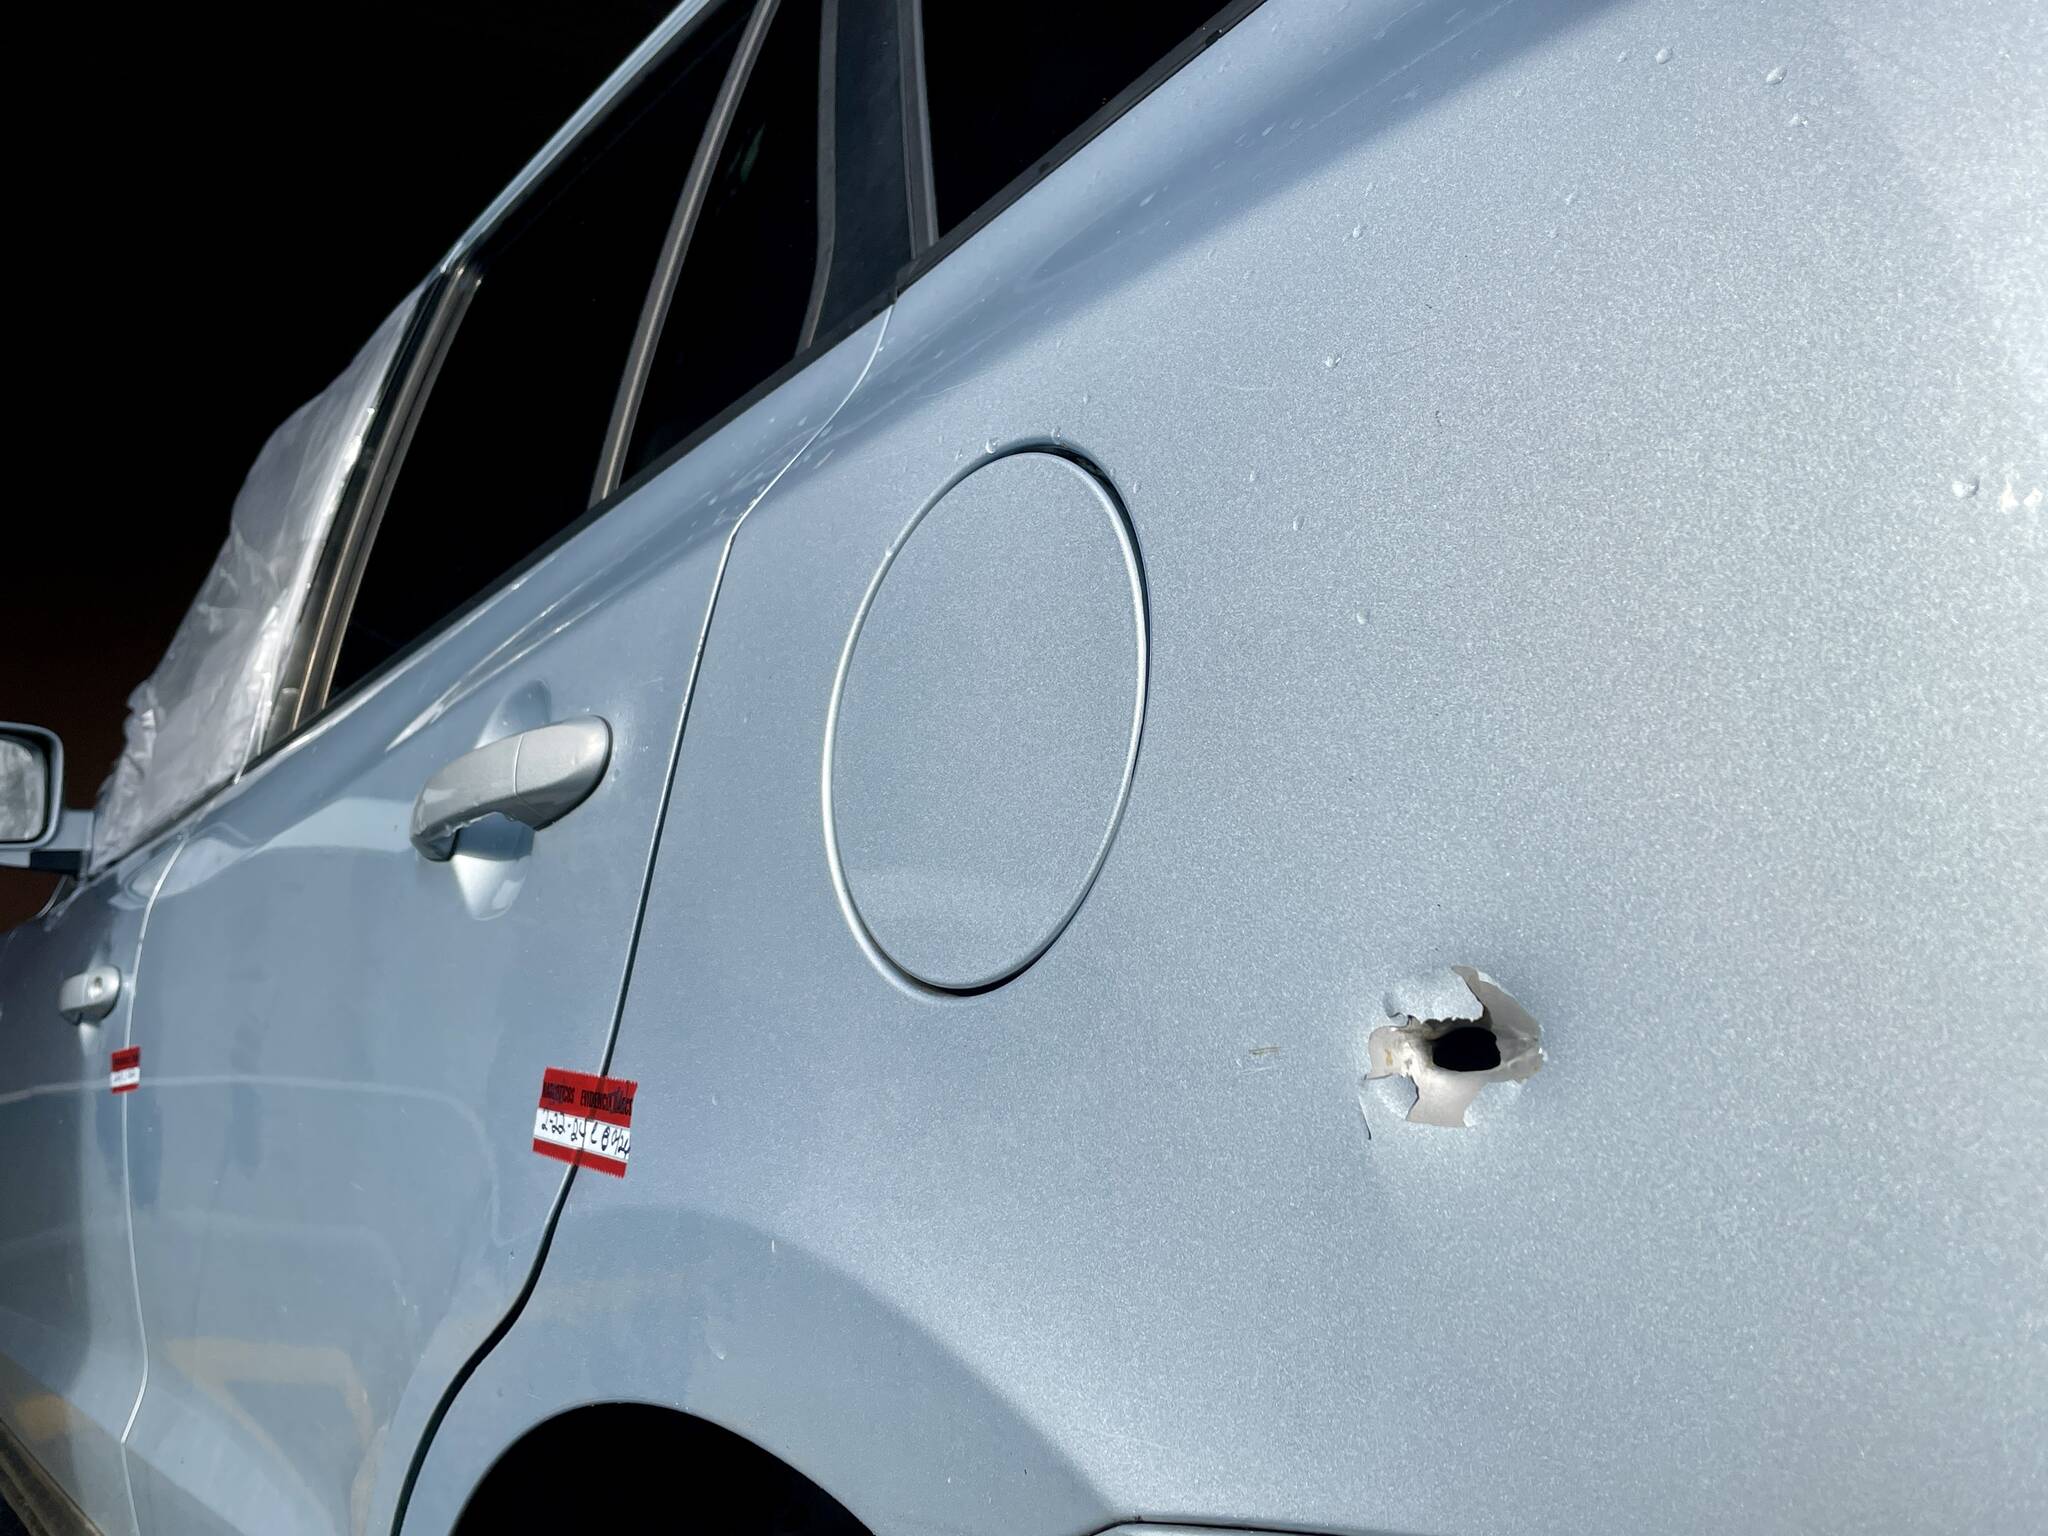 The impact from a handgun round is visible on a vehicle involved with a shooting in Aberdeen Thursday. (Michael S. Lockett / The Daily World)